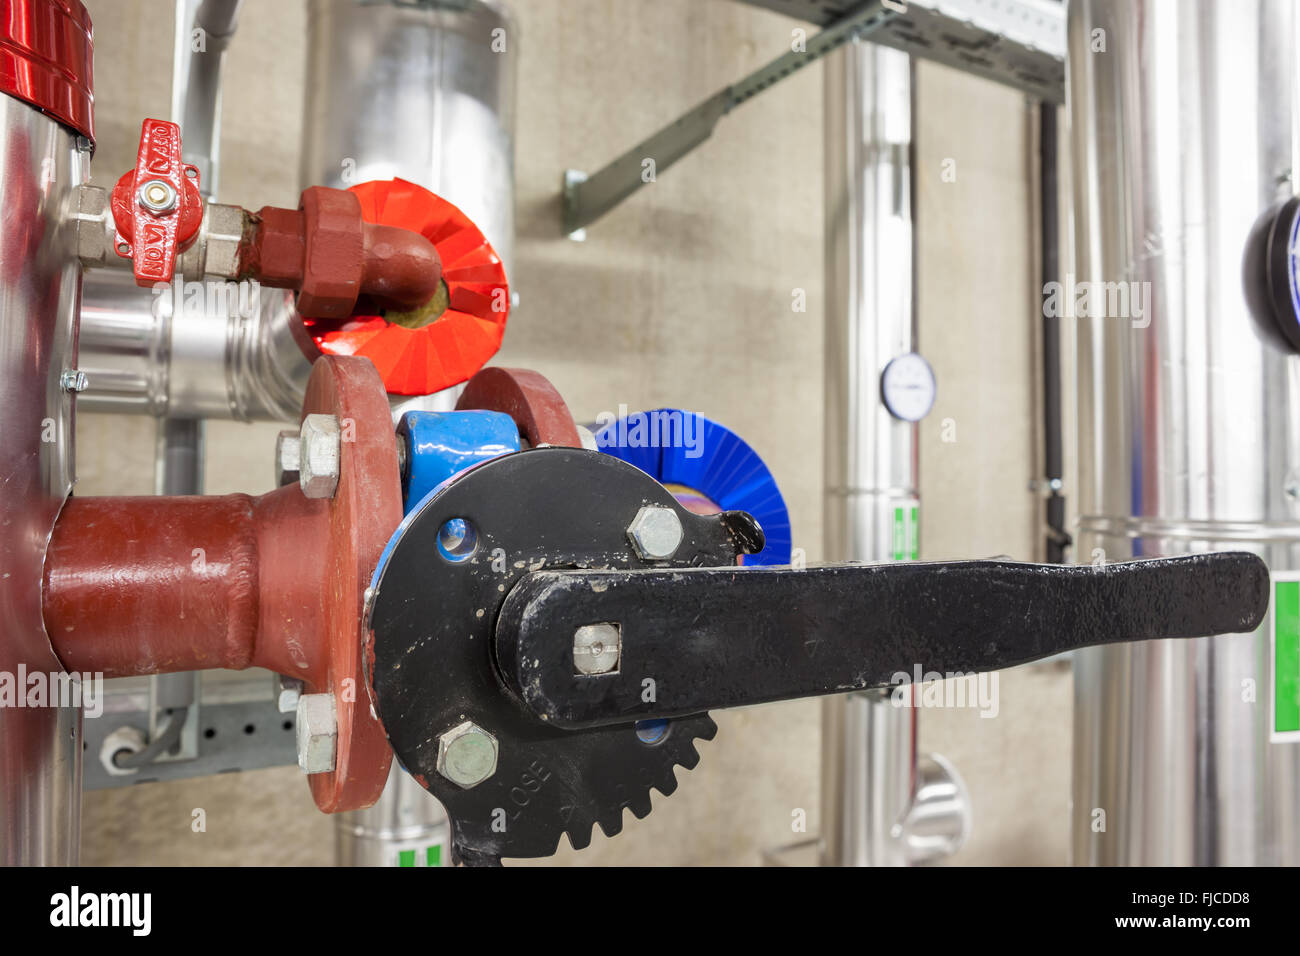 in an large building, there is an collector heating with an butterfly valve Stock Photo